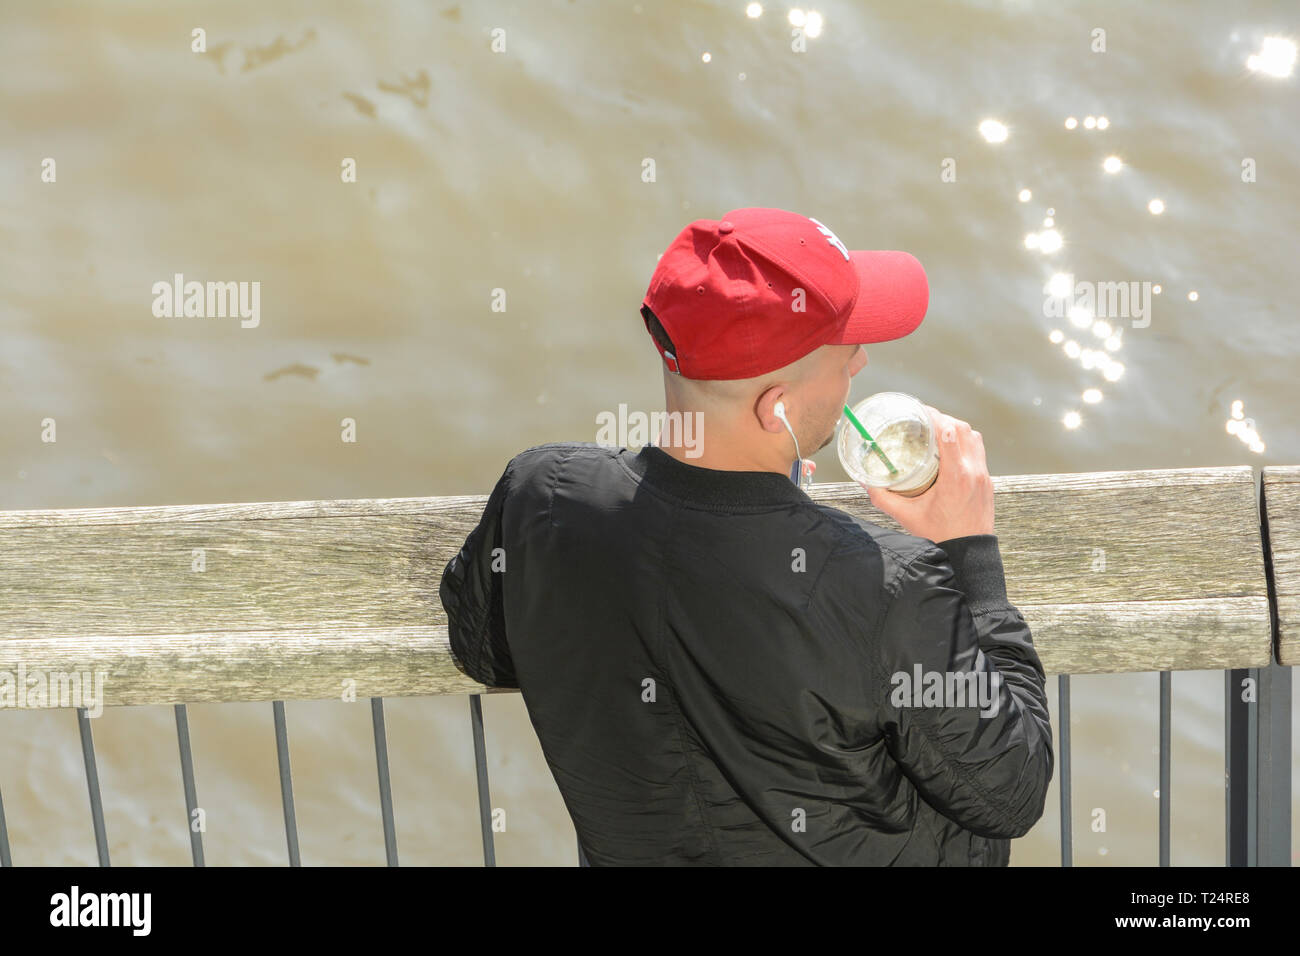 https://c8.alamy.com/comp/T24RE8/a-solitary-man-drinking-an-iced-coffee-and-wearing-a-basball-cap-in-london-uk-T24RE8.jpg